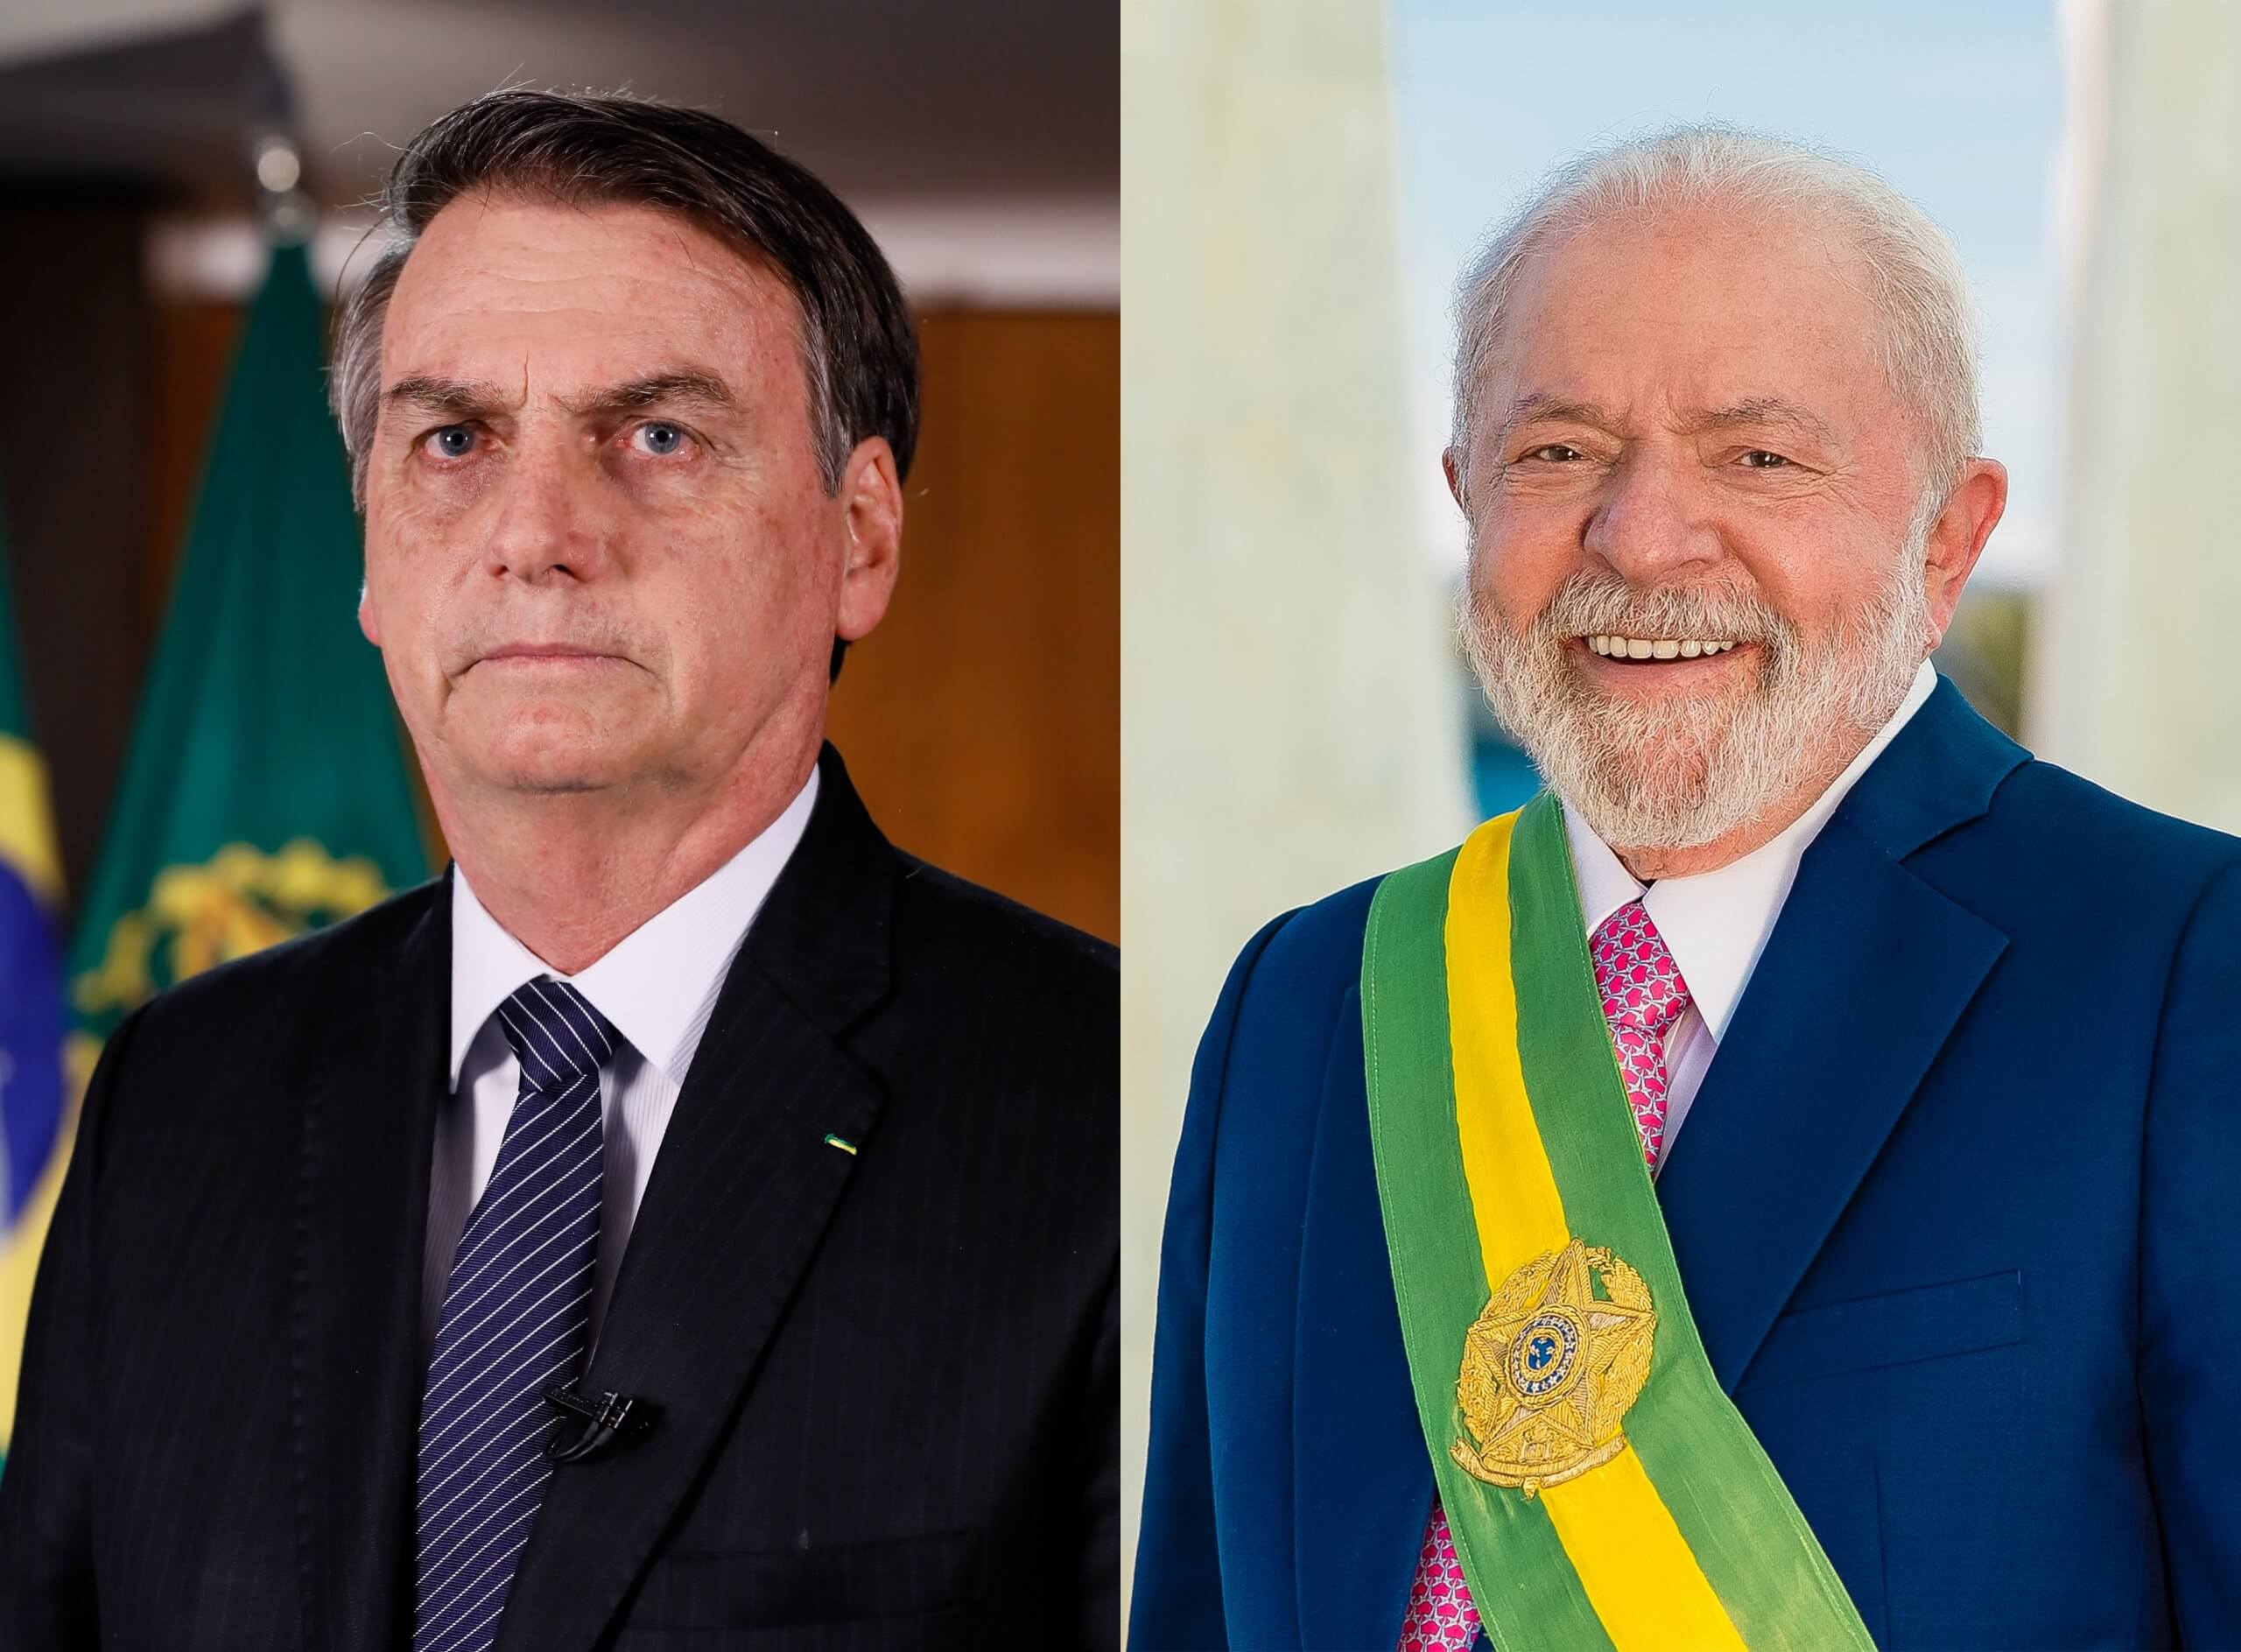 Da Silva came to power in the country instead of Bolsonaro, after declaring his commitment to protect and restore the Amazon. Lula da Silva (right) and Jair Bolsonaro, photos: Palácio do Planalto from Brasilia, Brasil; Isac NóbregaPR; CC BY 2.0